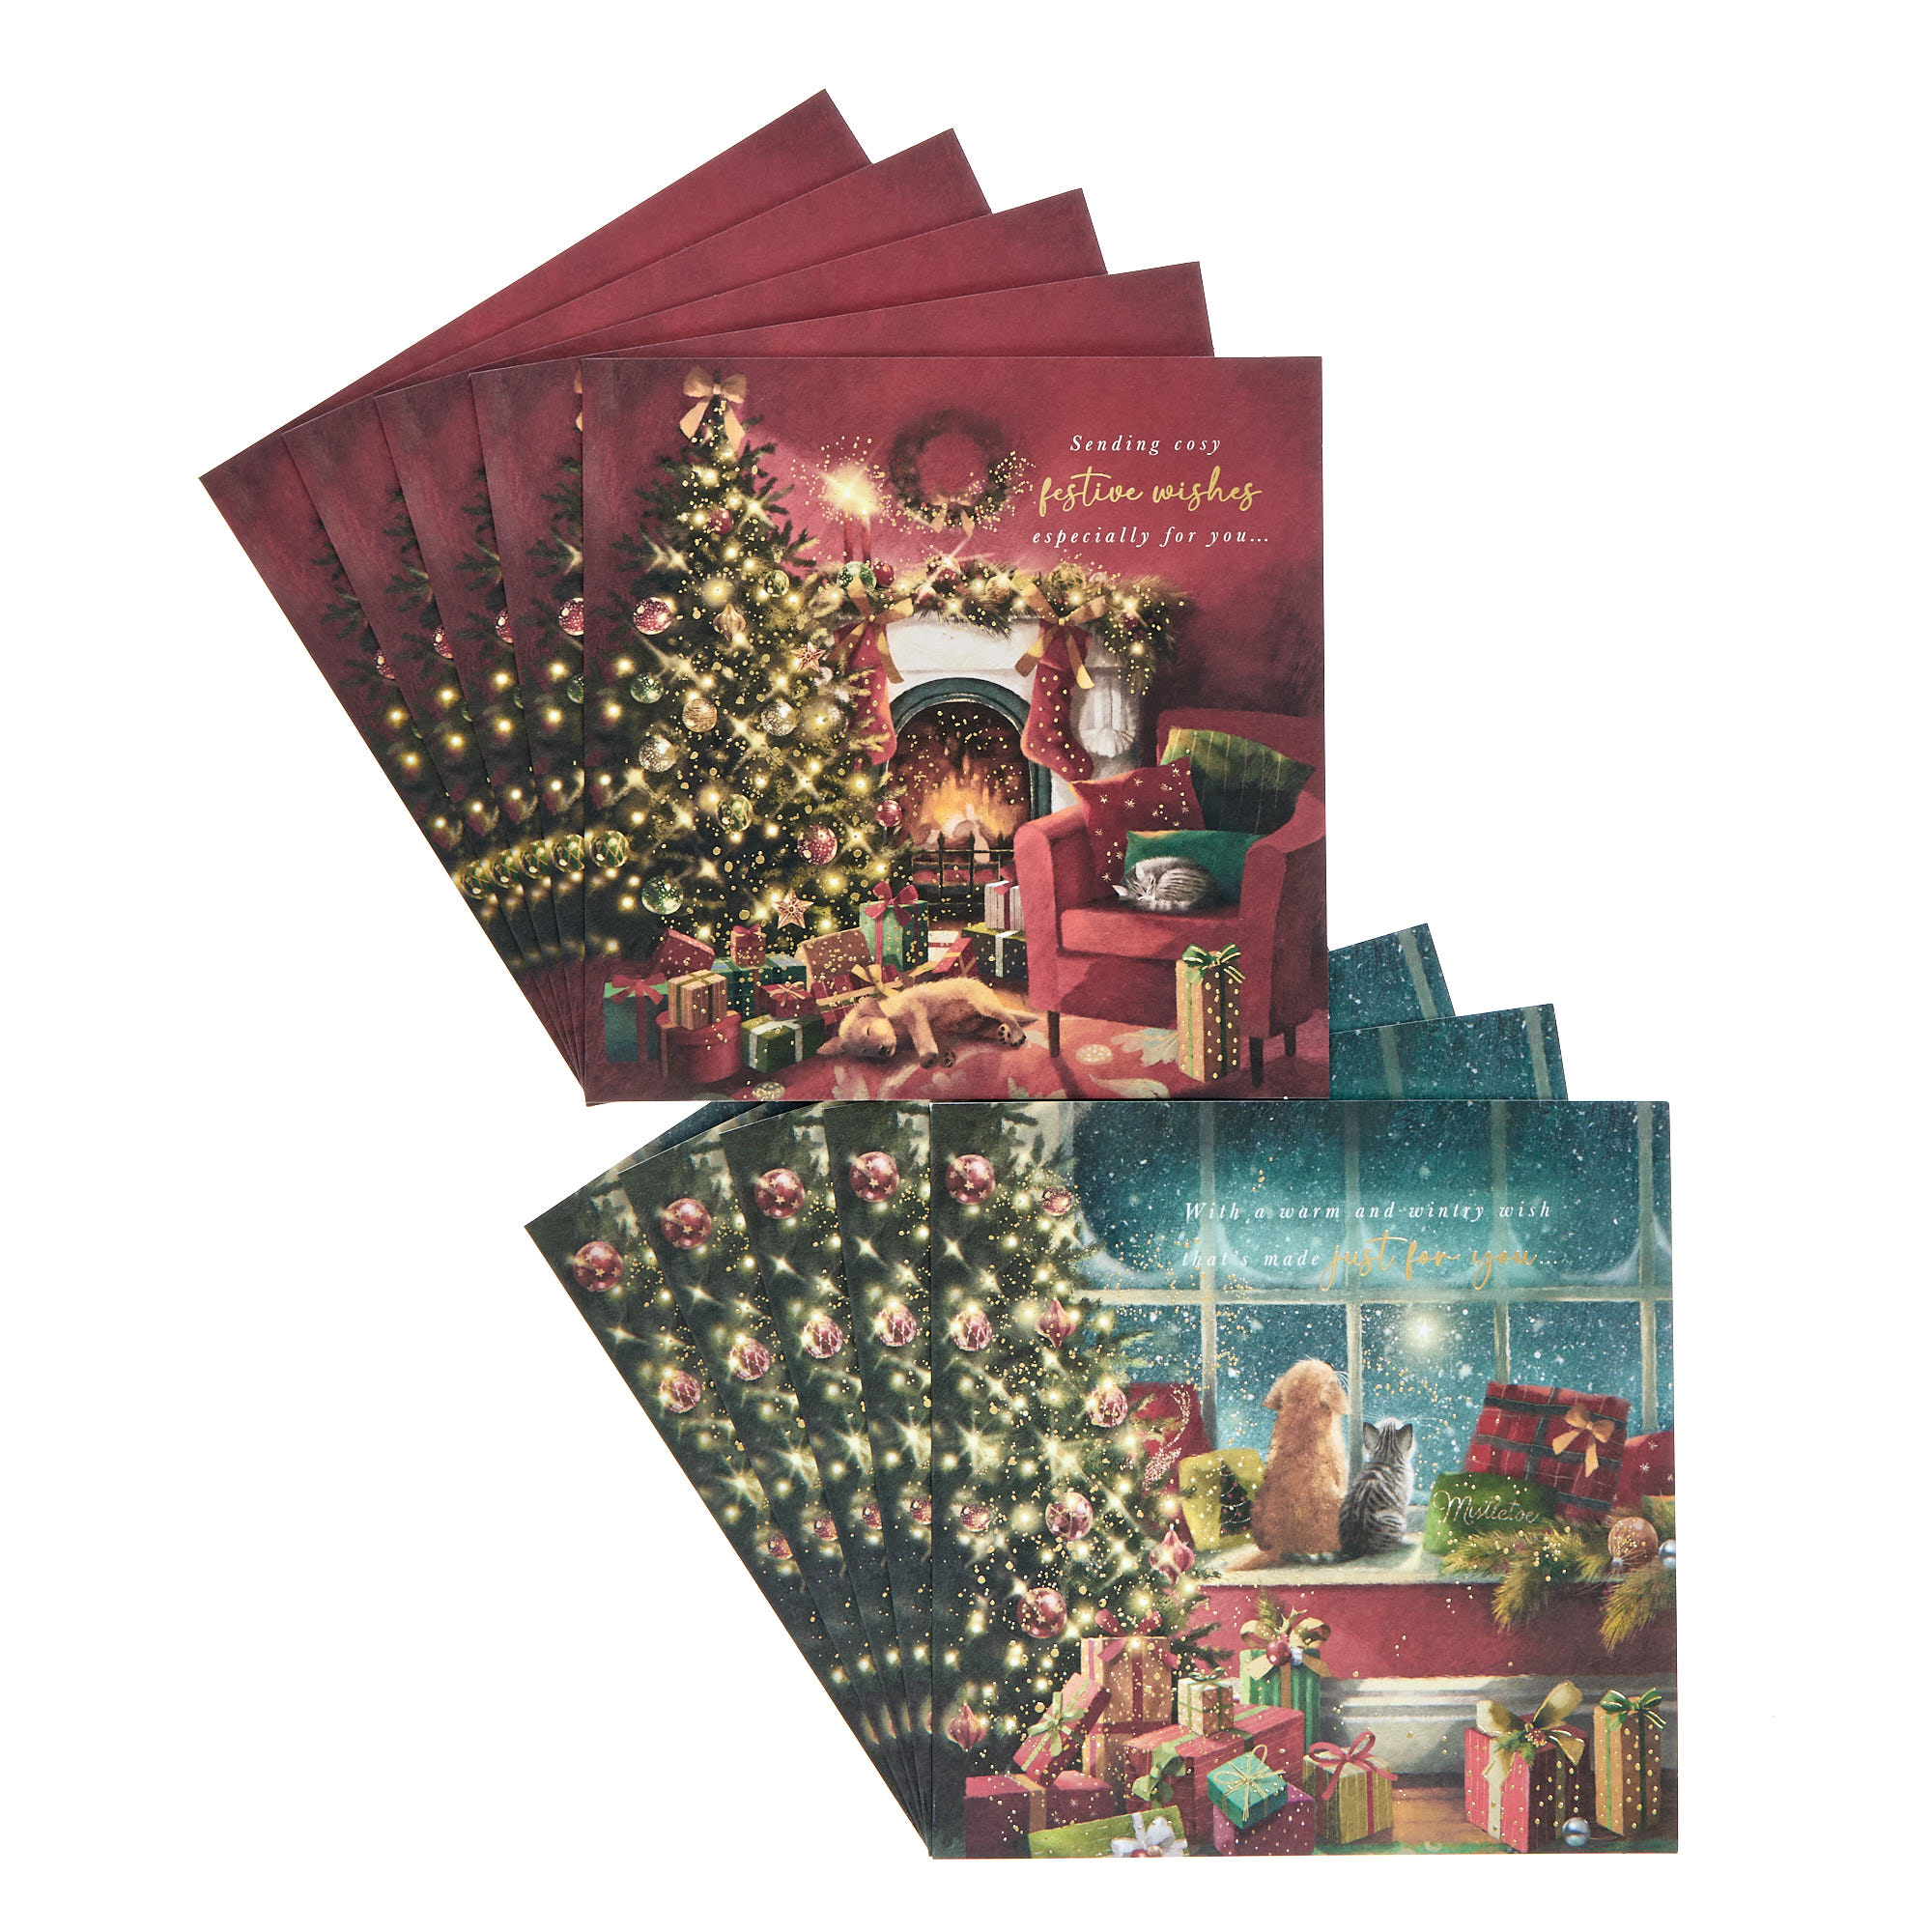 16 Charity Christmas Cards - Gifts & Pets (2 Designs)